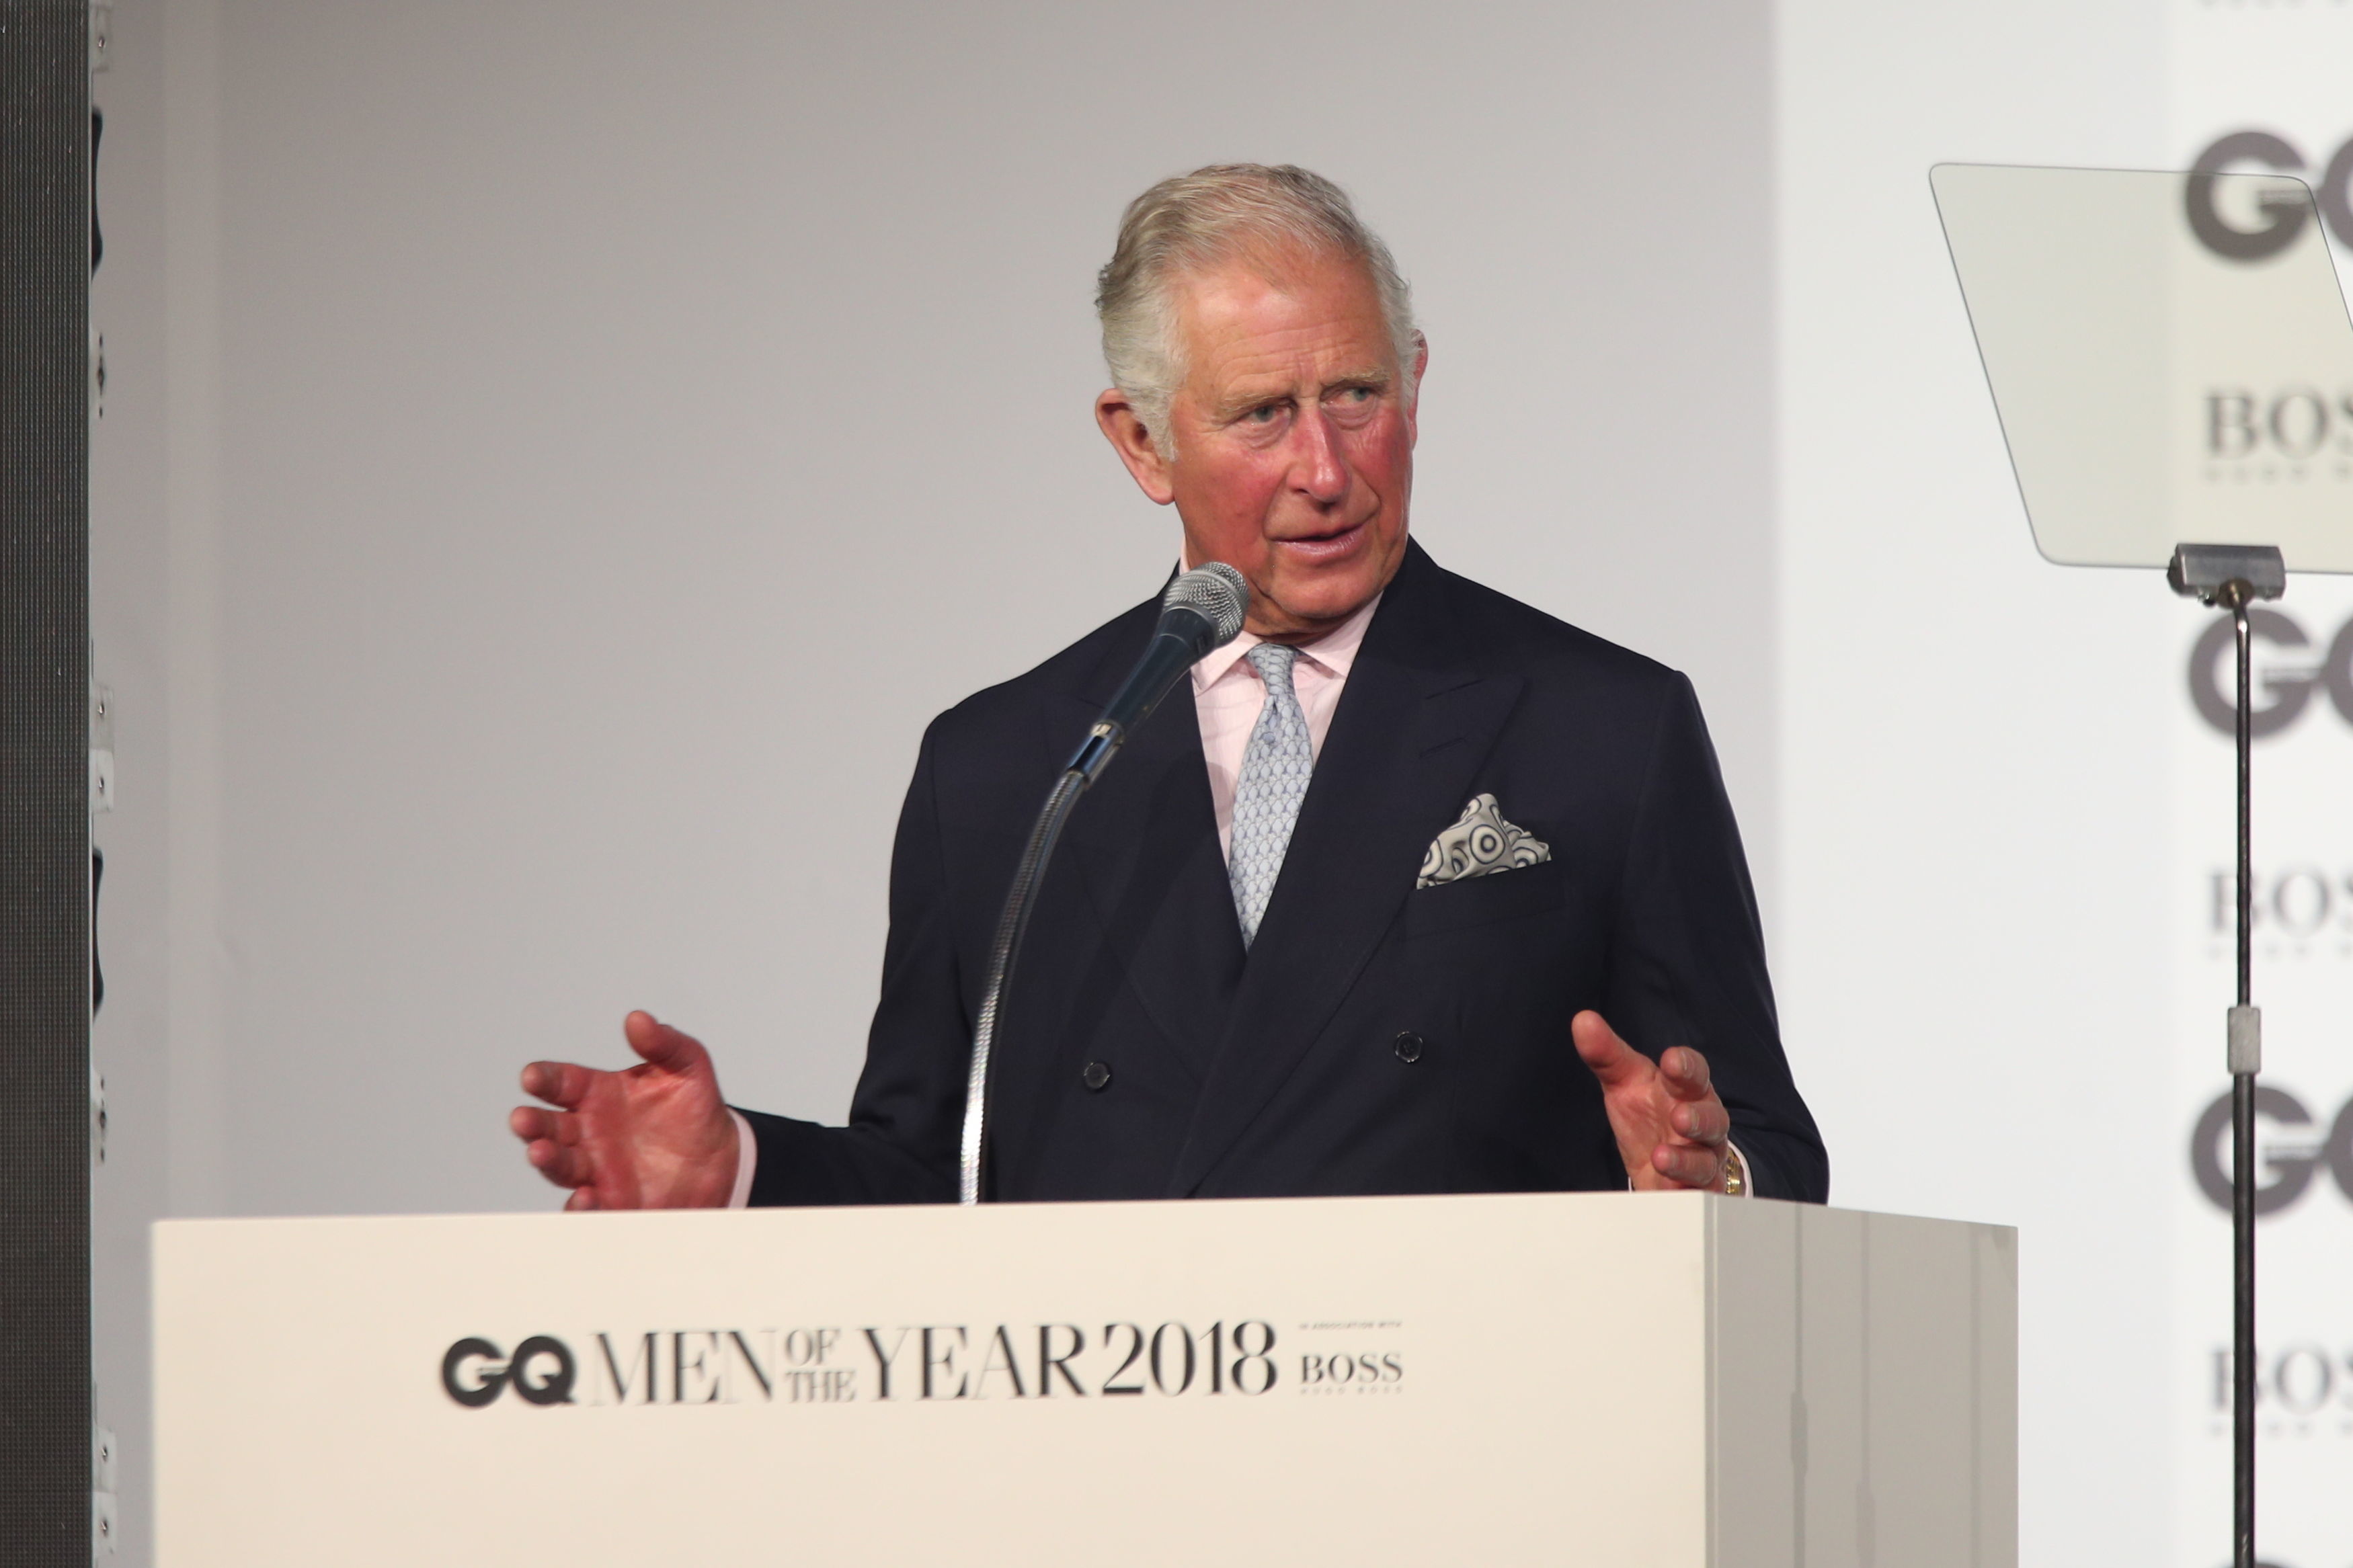 The Prince of Wales accepting the Lifetime Achievement award at the GQ Men of the Year Awards 2018 in Association with Hugo Boss held at The Tate Modern in London. (Yui Mok/PA)